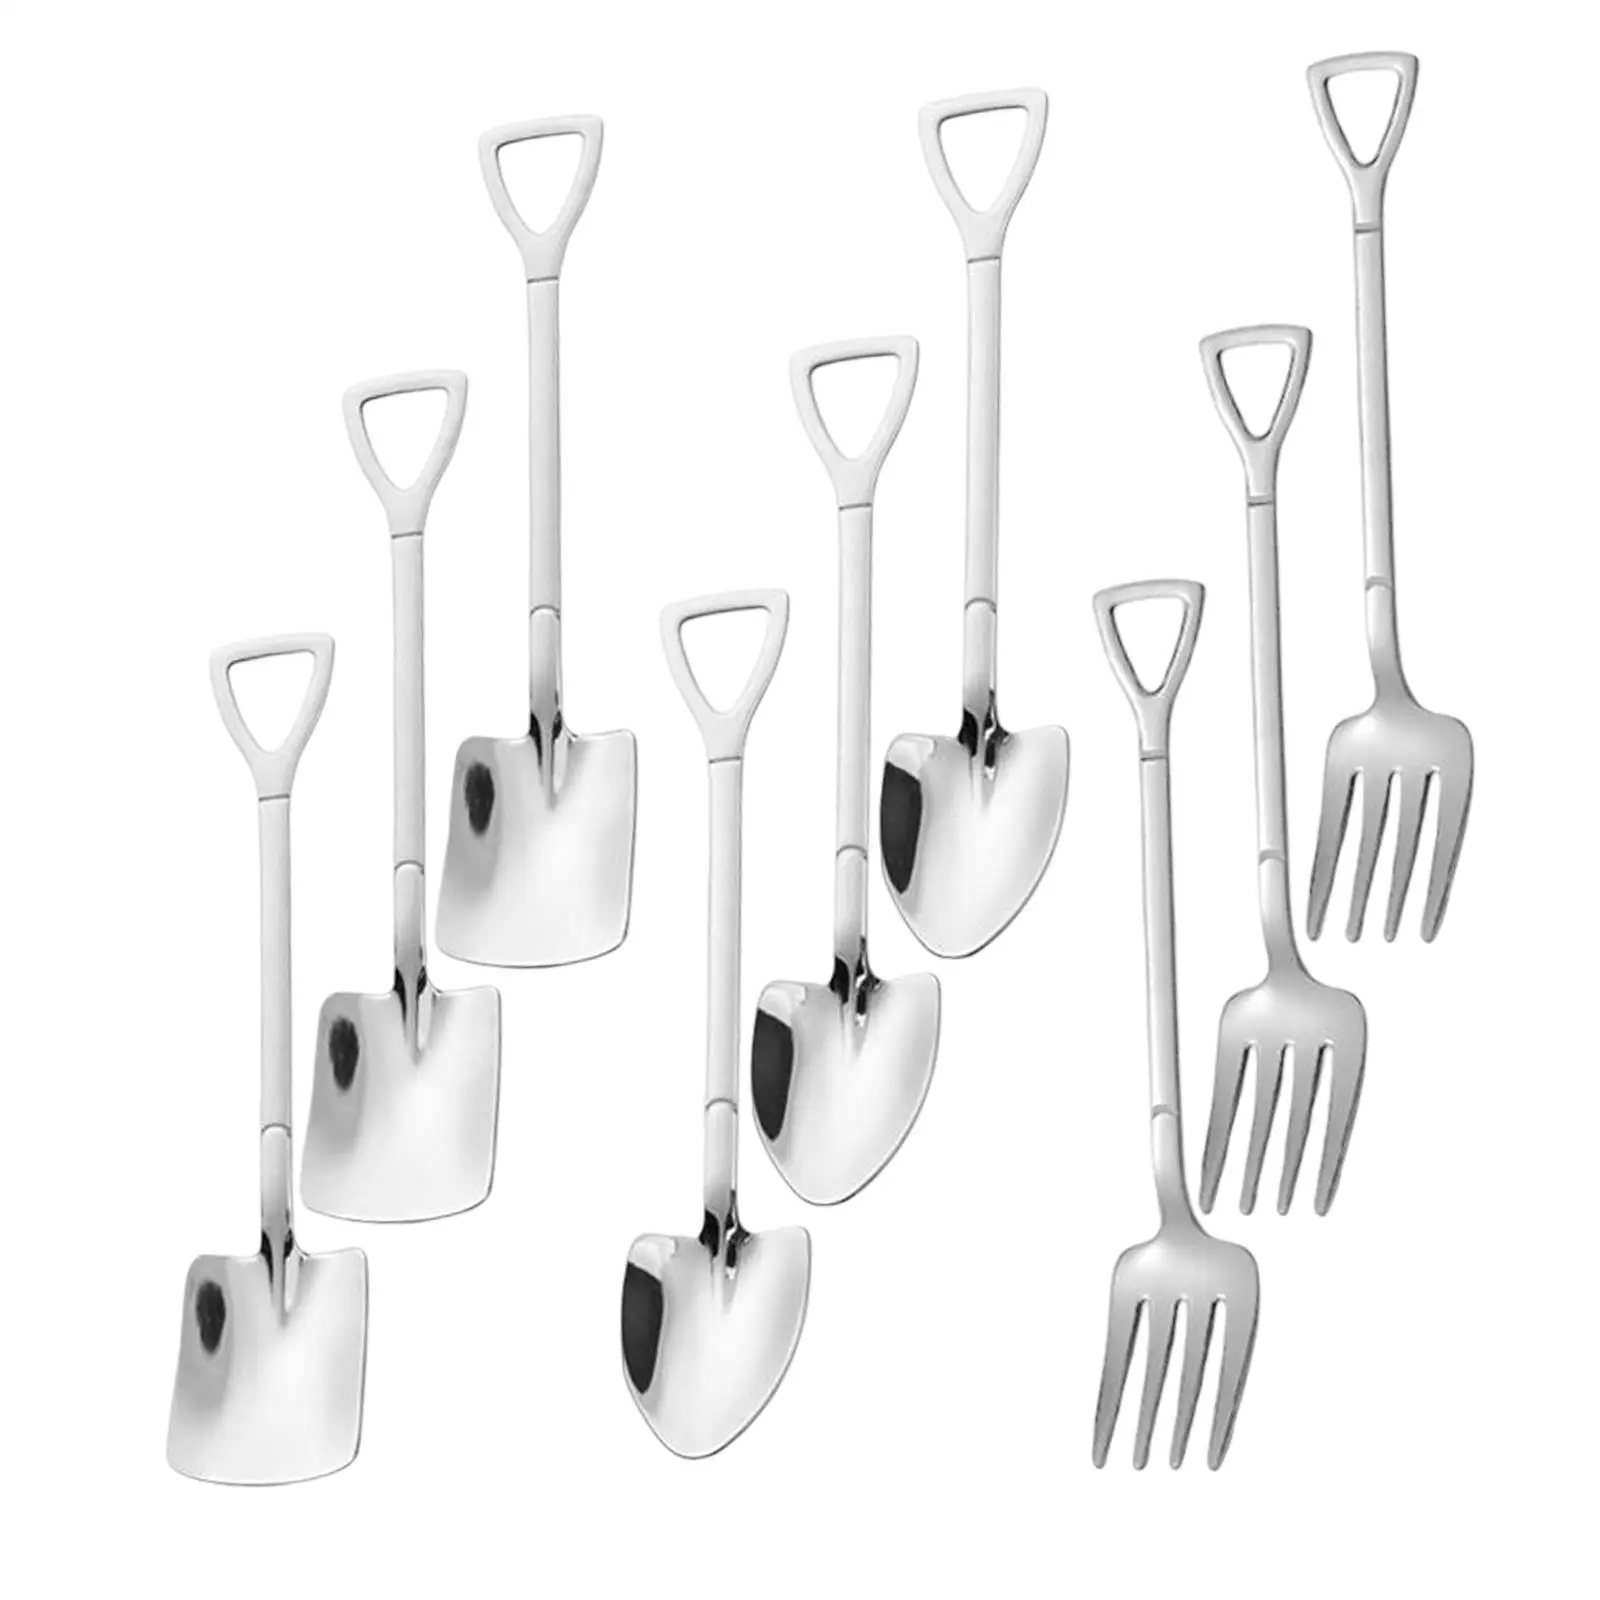 9x Kitchen Cutlery Set Espresso Spoons Dinnerware Tableware Spoons Tableware for Wedding Dining Room Christmas Hotel Cafe